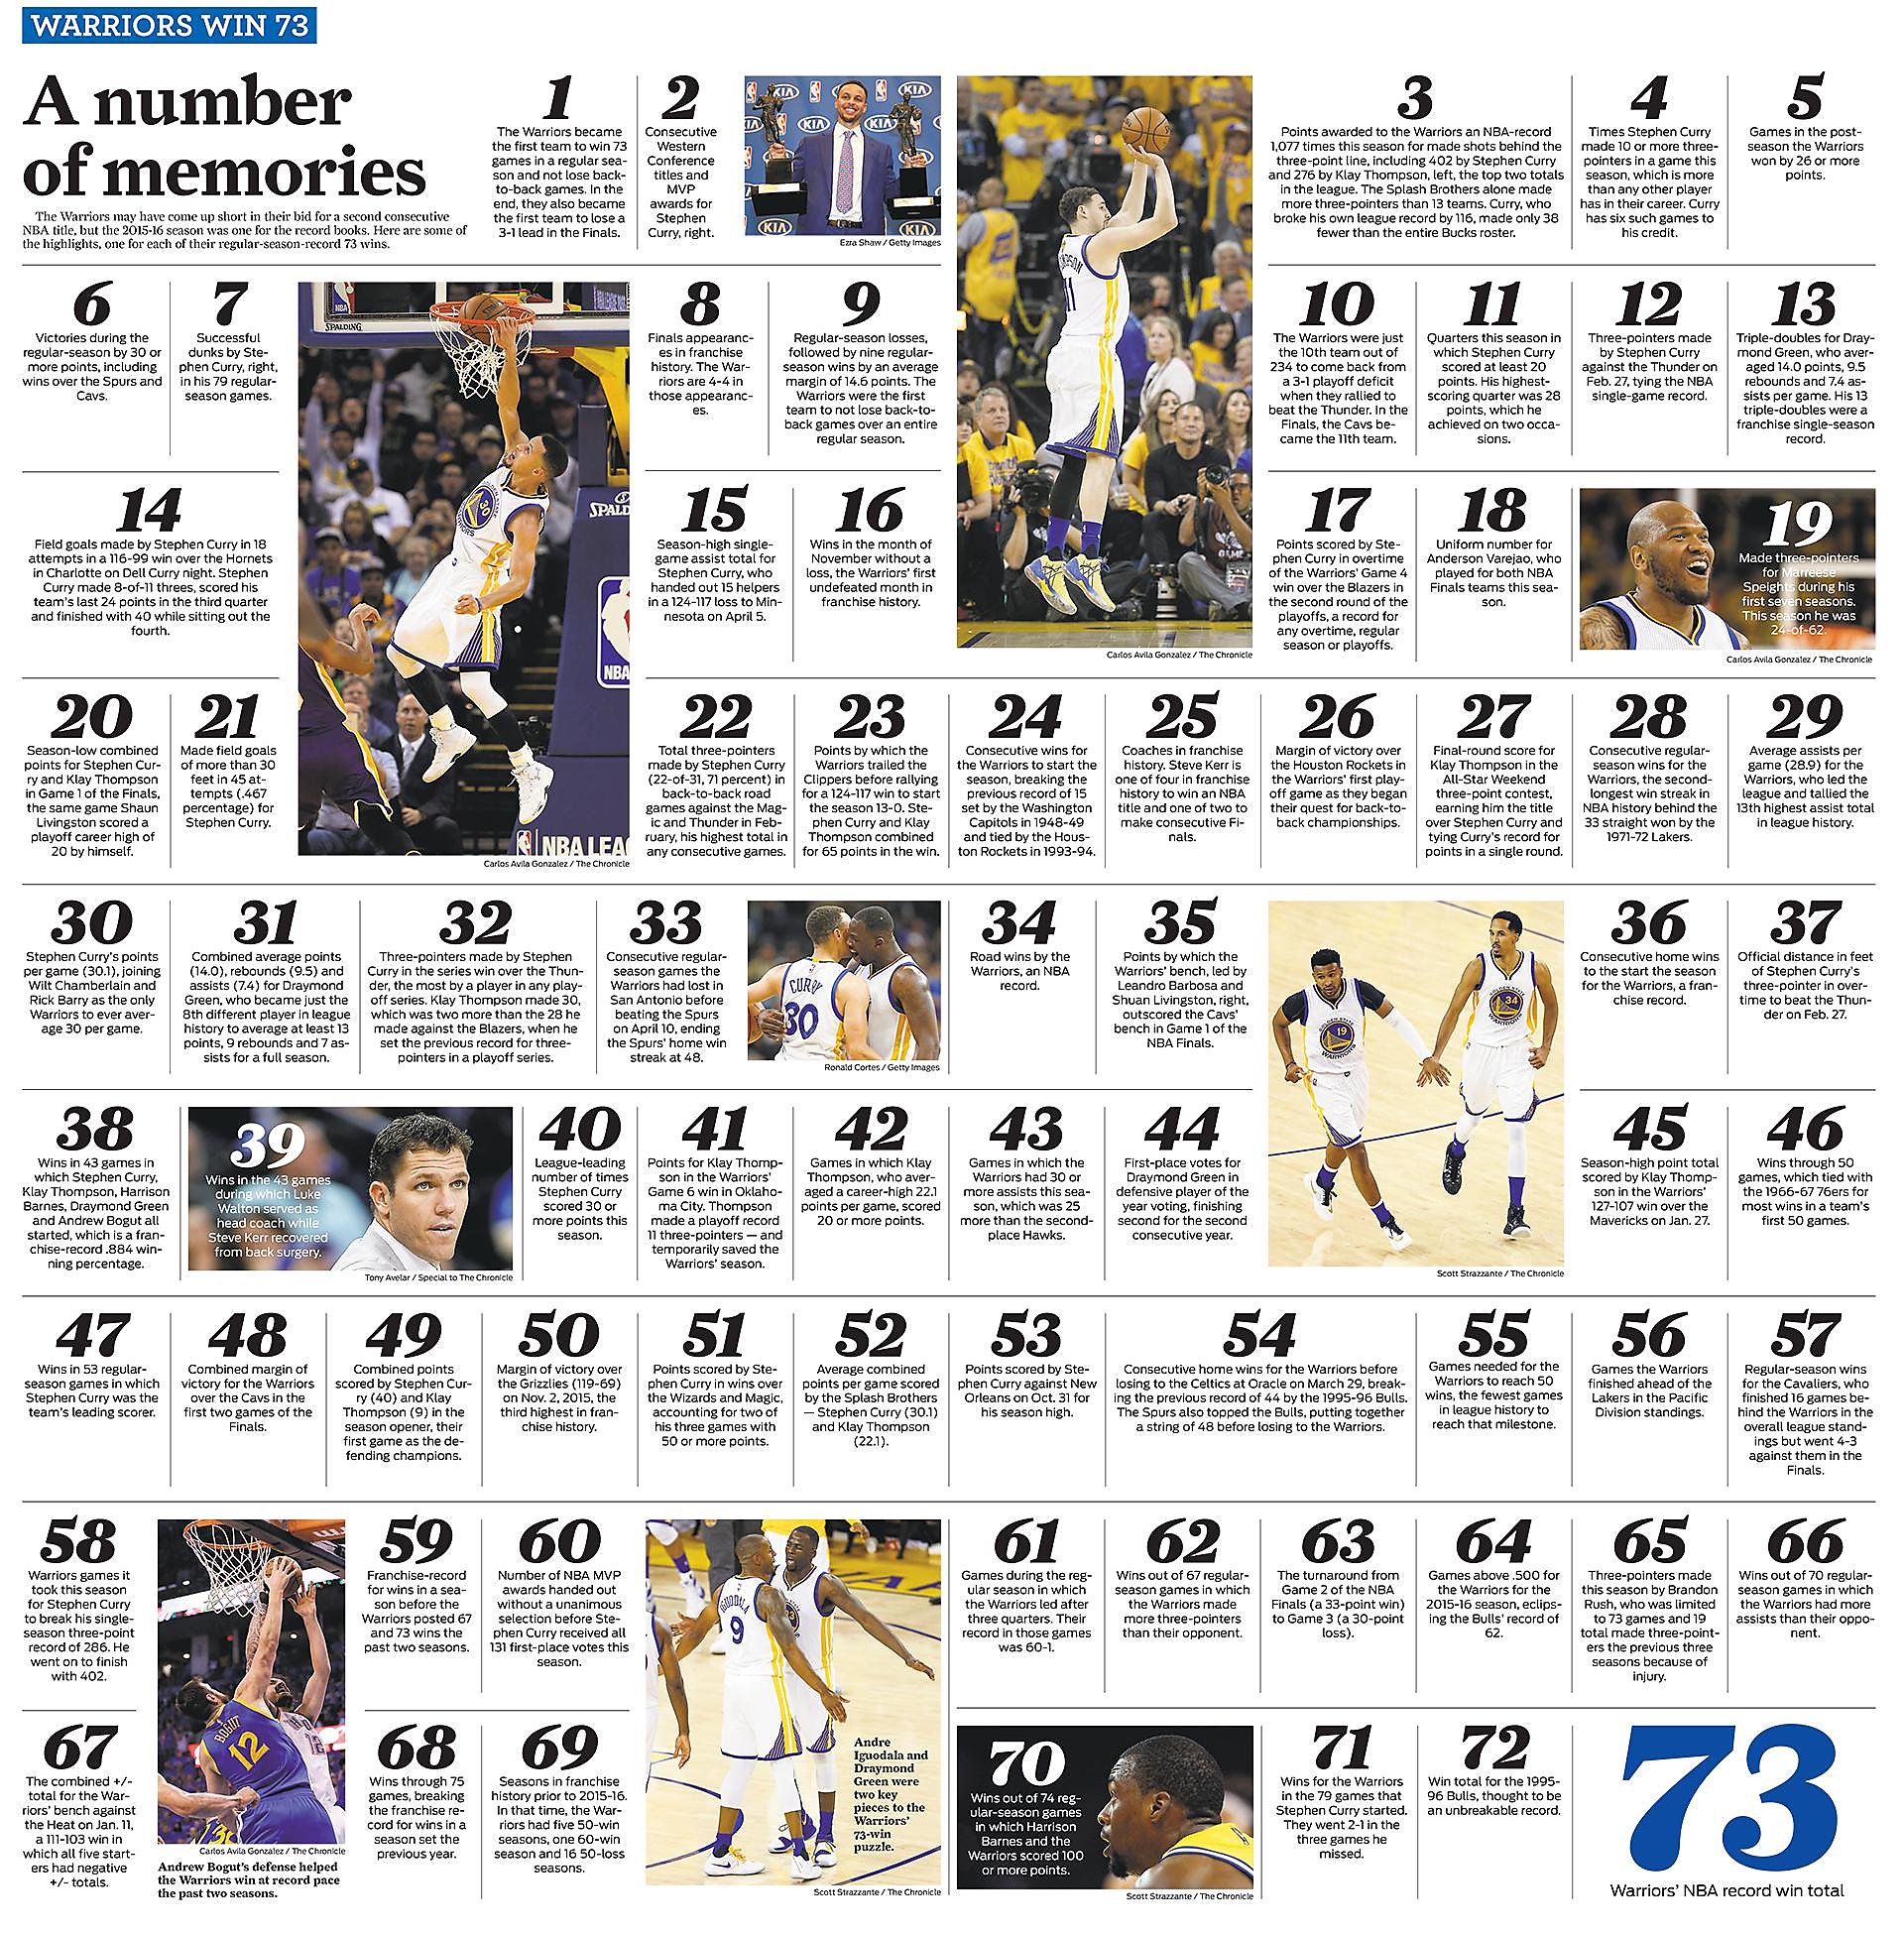 Warriors set NBA record with 73rd victory